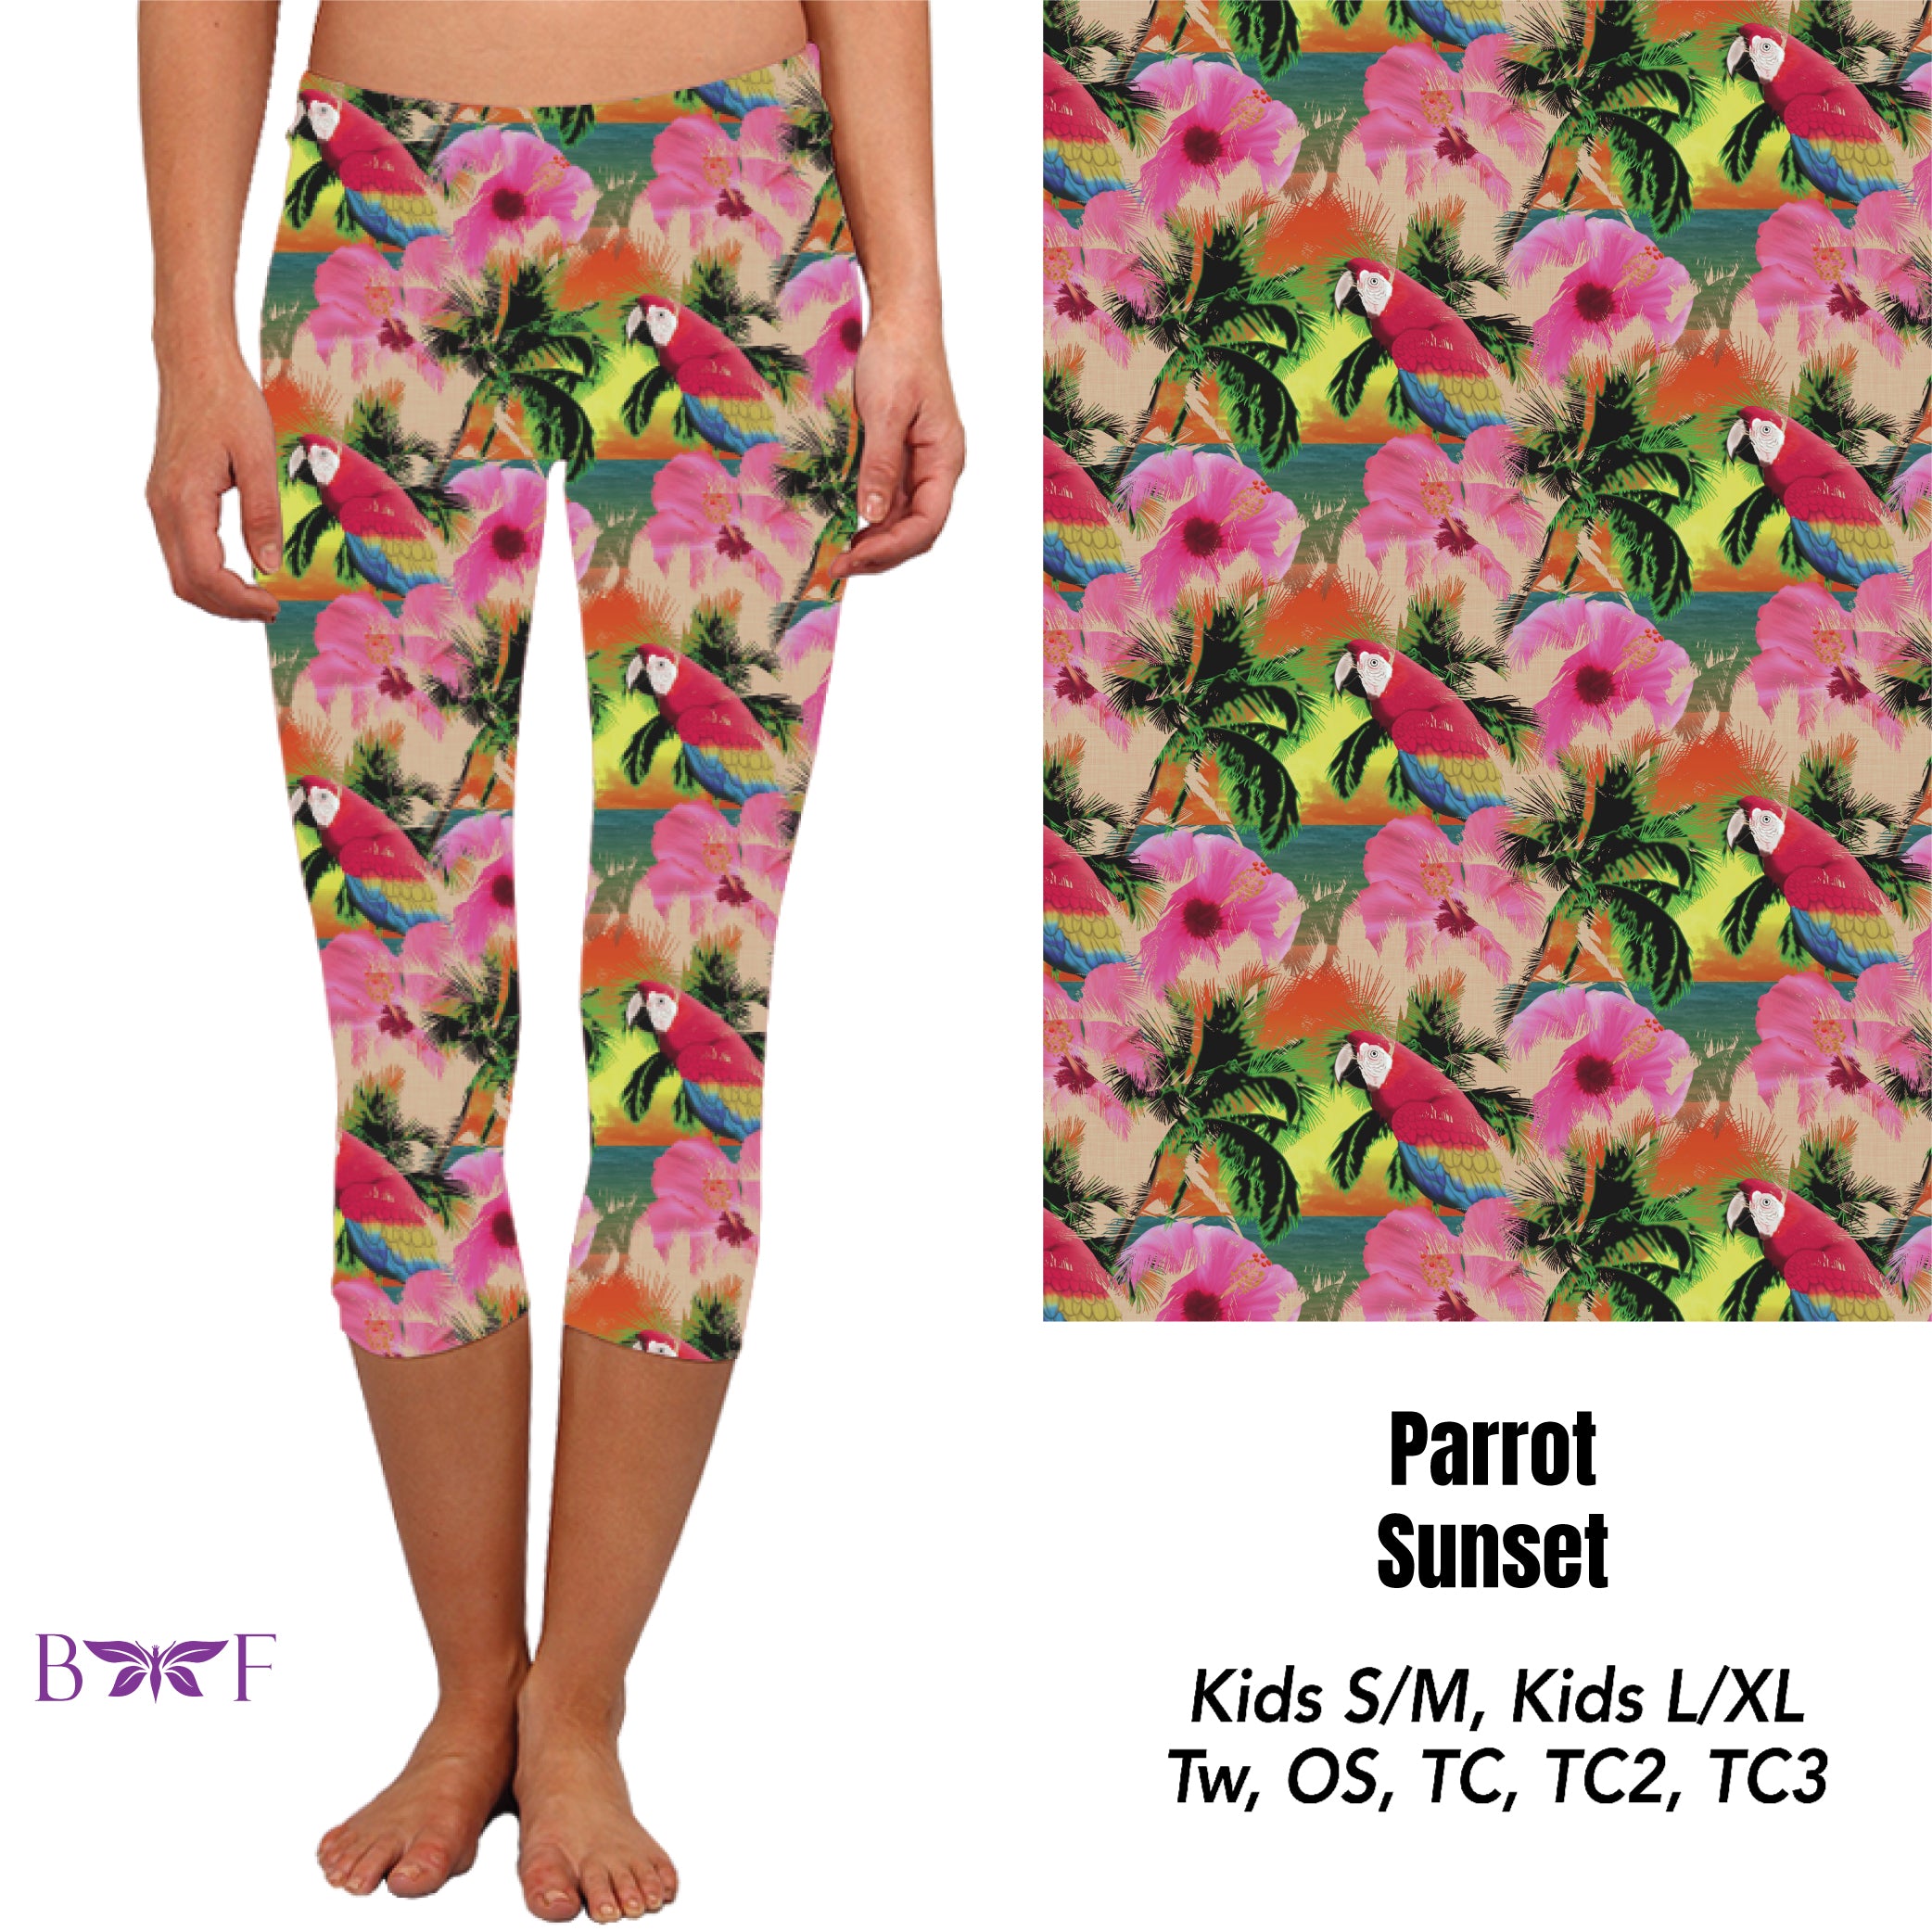 Parrot sunset capri with pockets